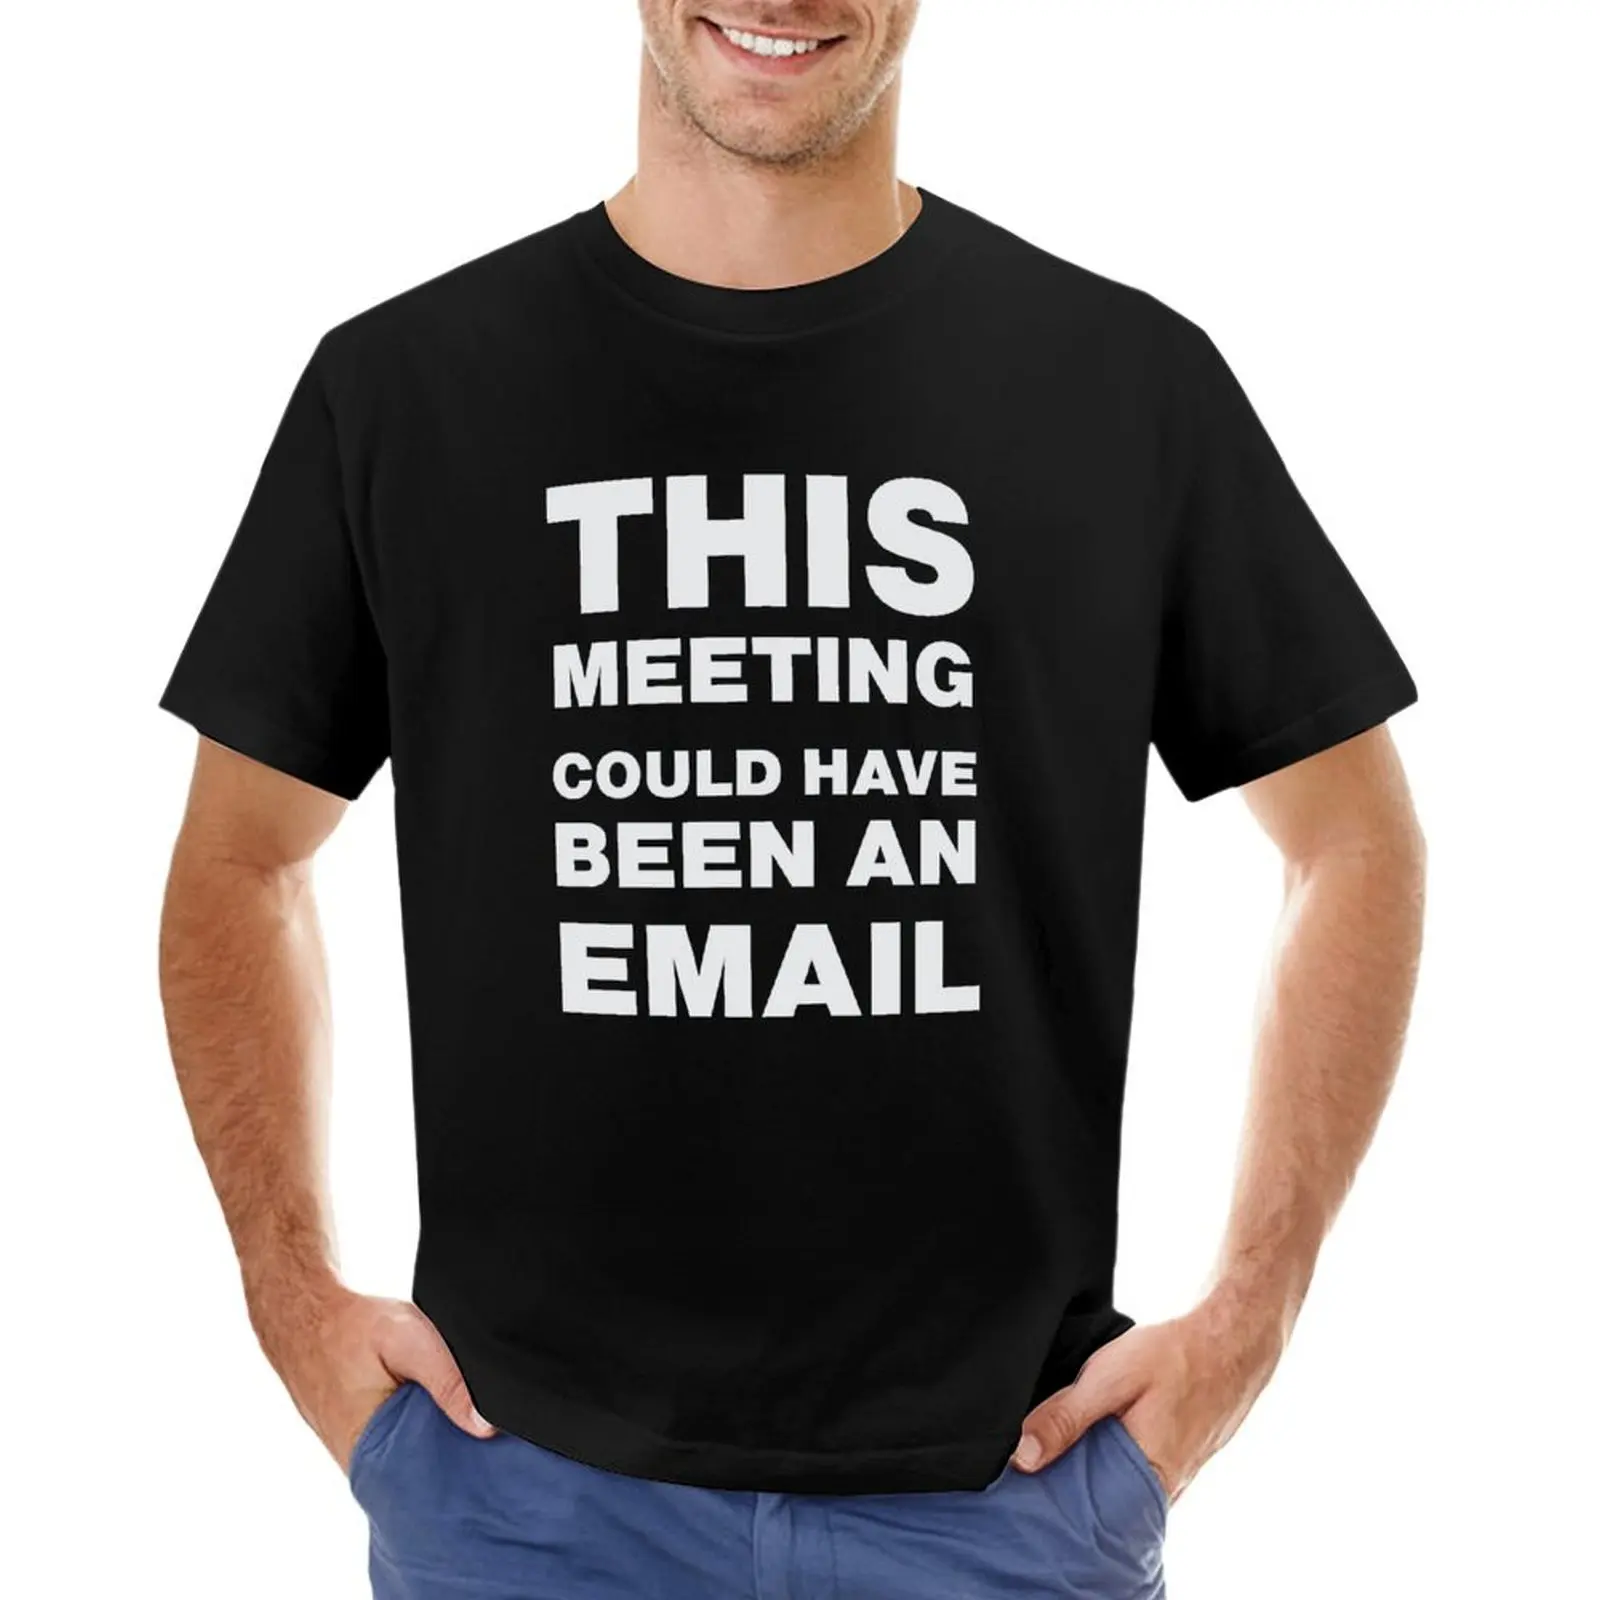 

This Meeting Could Have Been An Email T-shirt Aesthetic clothing tees shirts graphic tees mens t shirt graphic